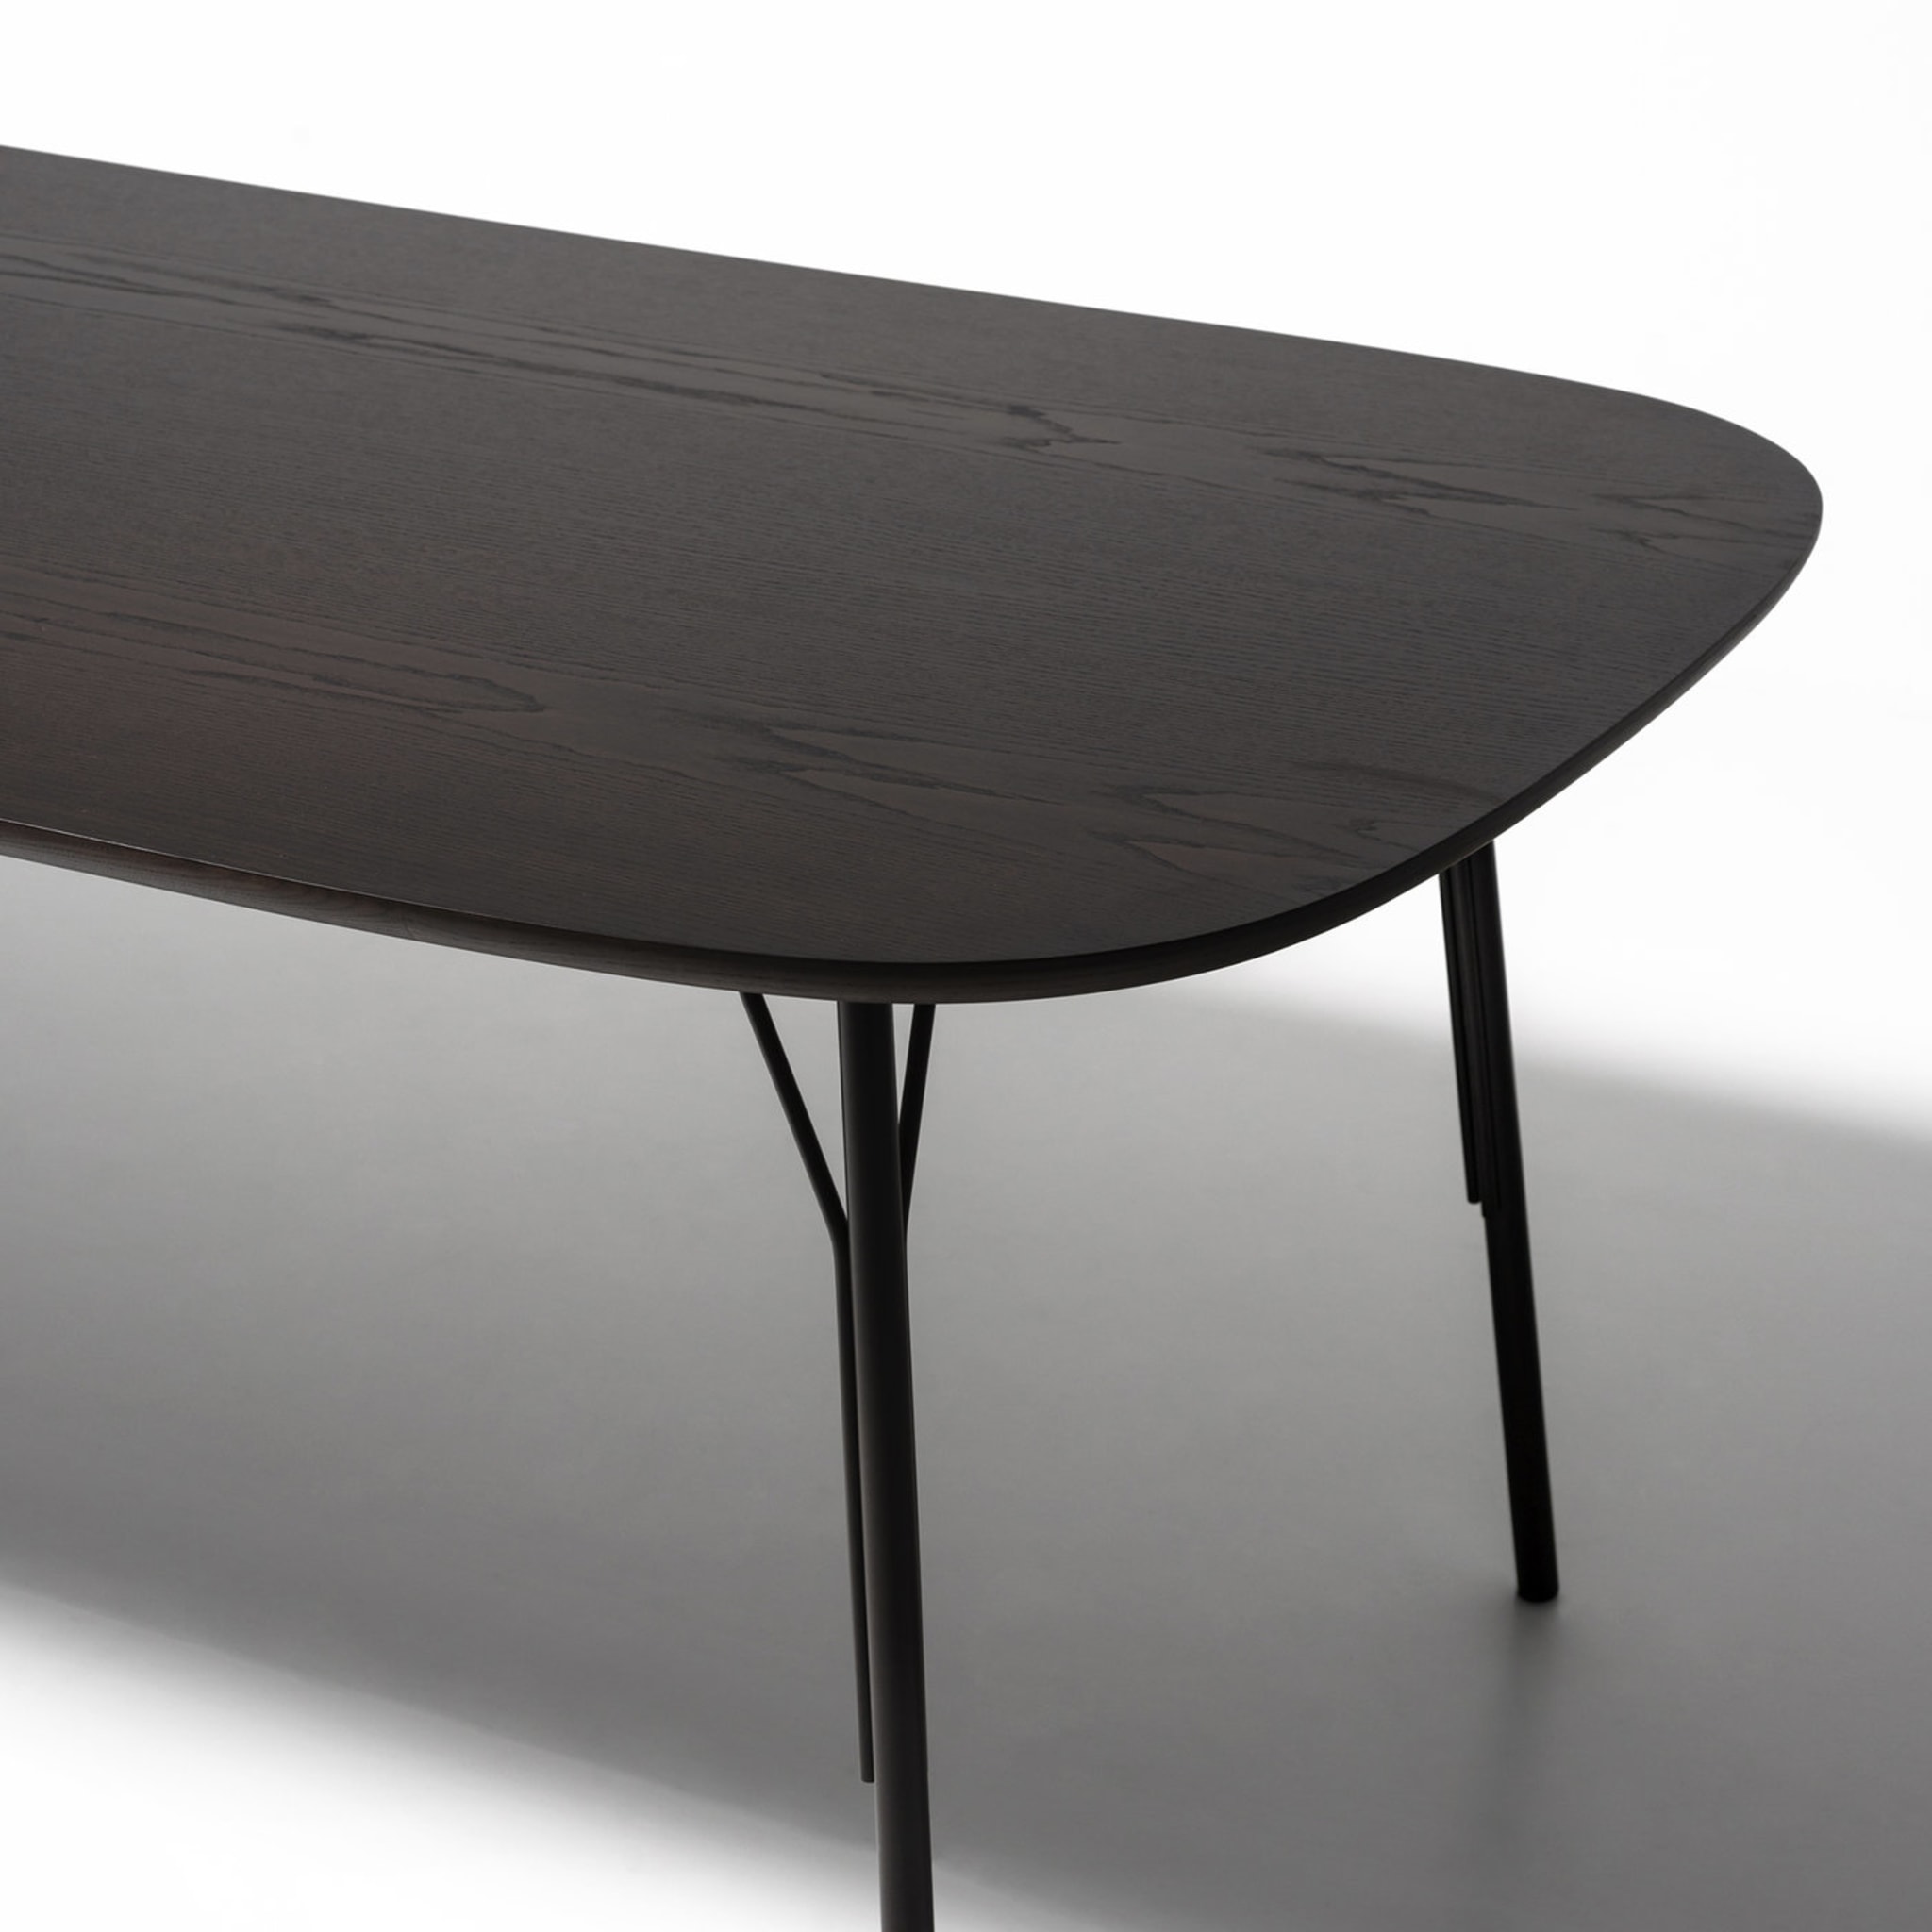 Kelly T Wenge Table by Claesson Koivisto Rune - Alternative view 2